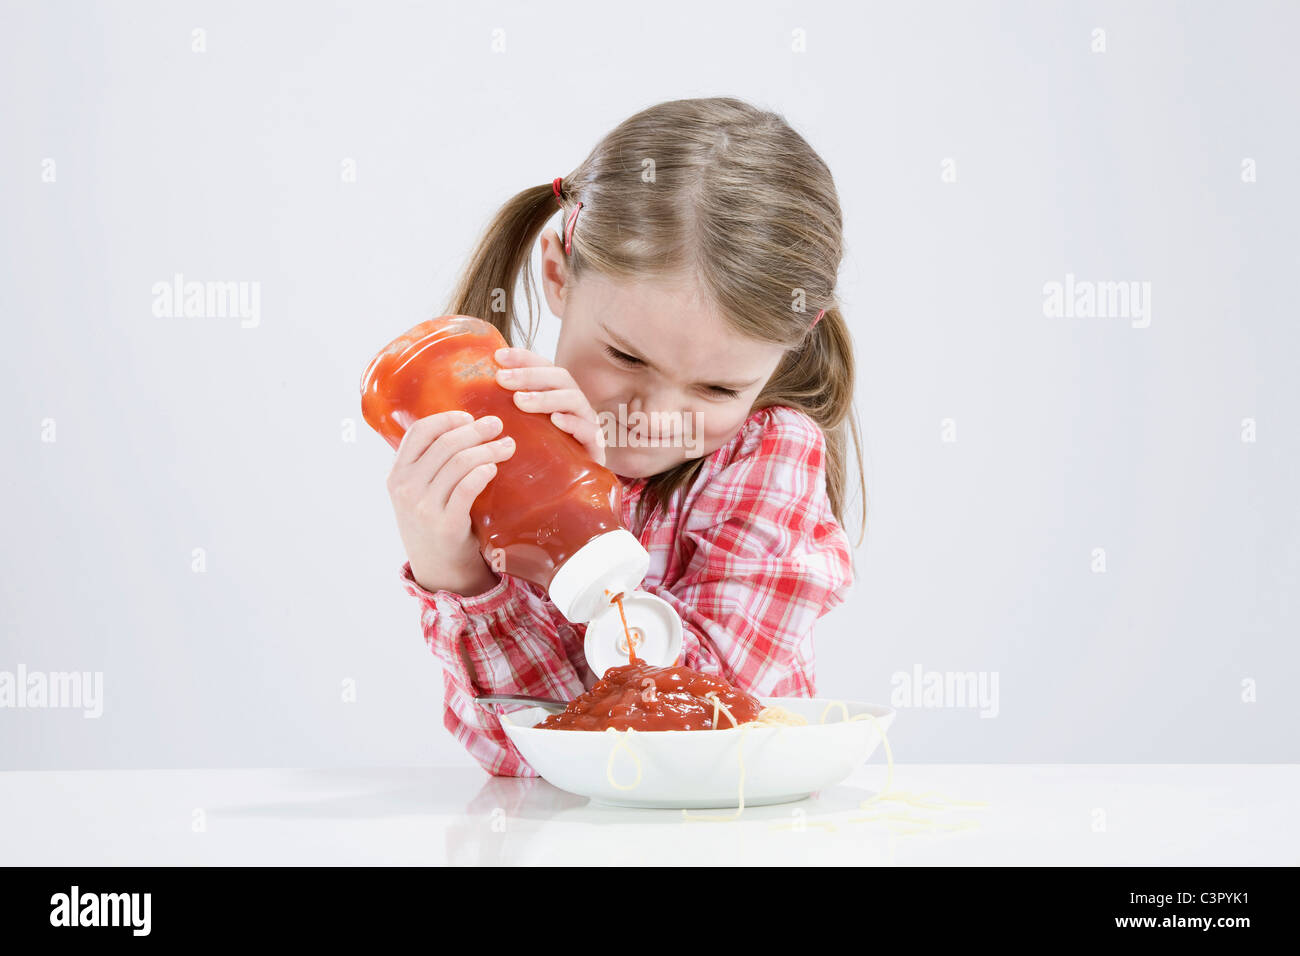 Girl (4-5) pouring ketchup sur spaghetti Banque D'Images